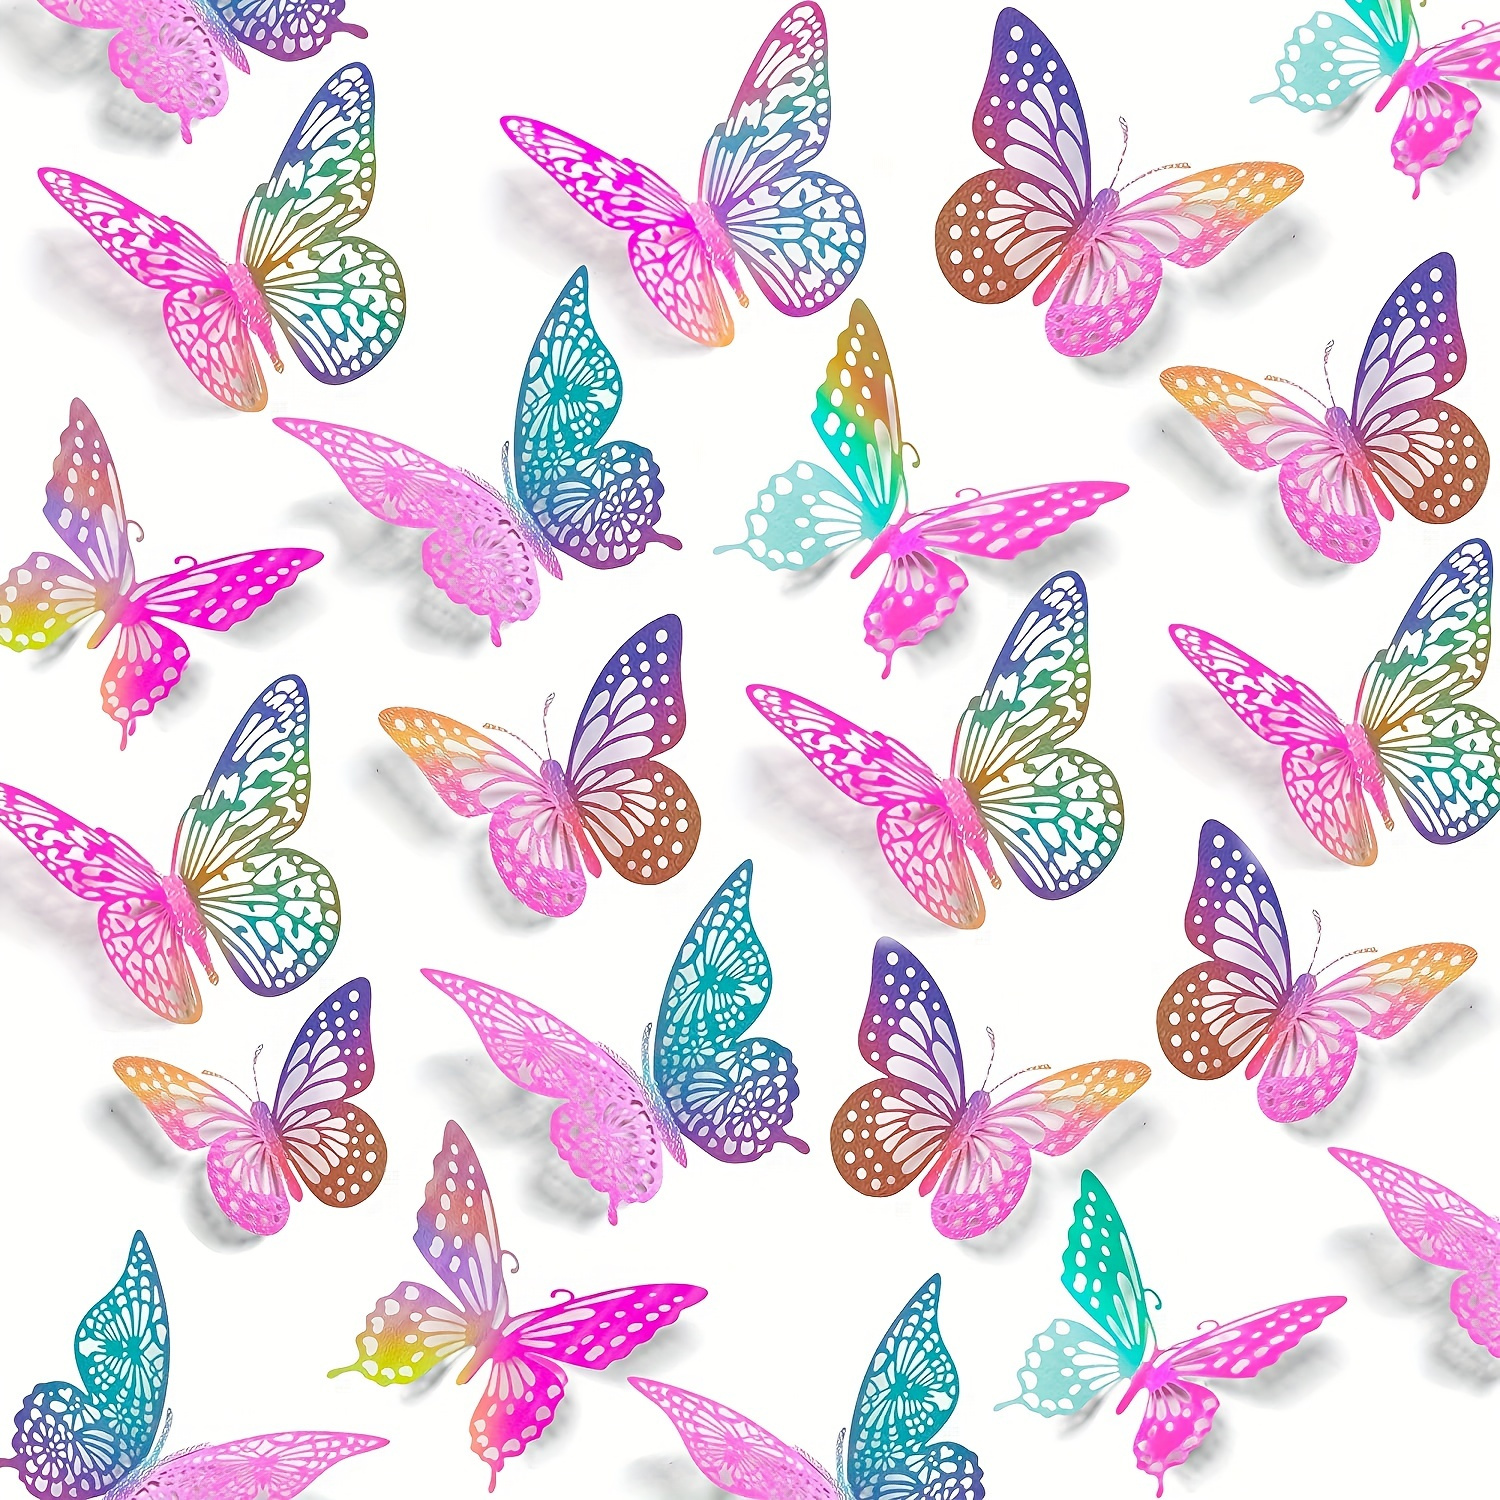 

12pcs 3d Metallic Butterfly Wall Stickers - Perfect For Home Decor, Weddings, Birthdays & More!